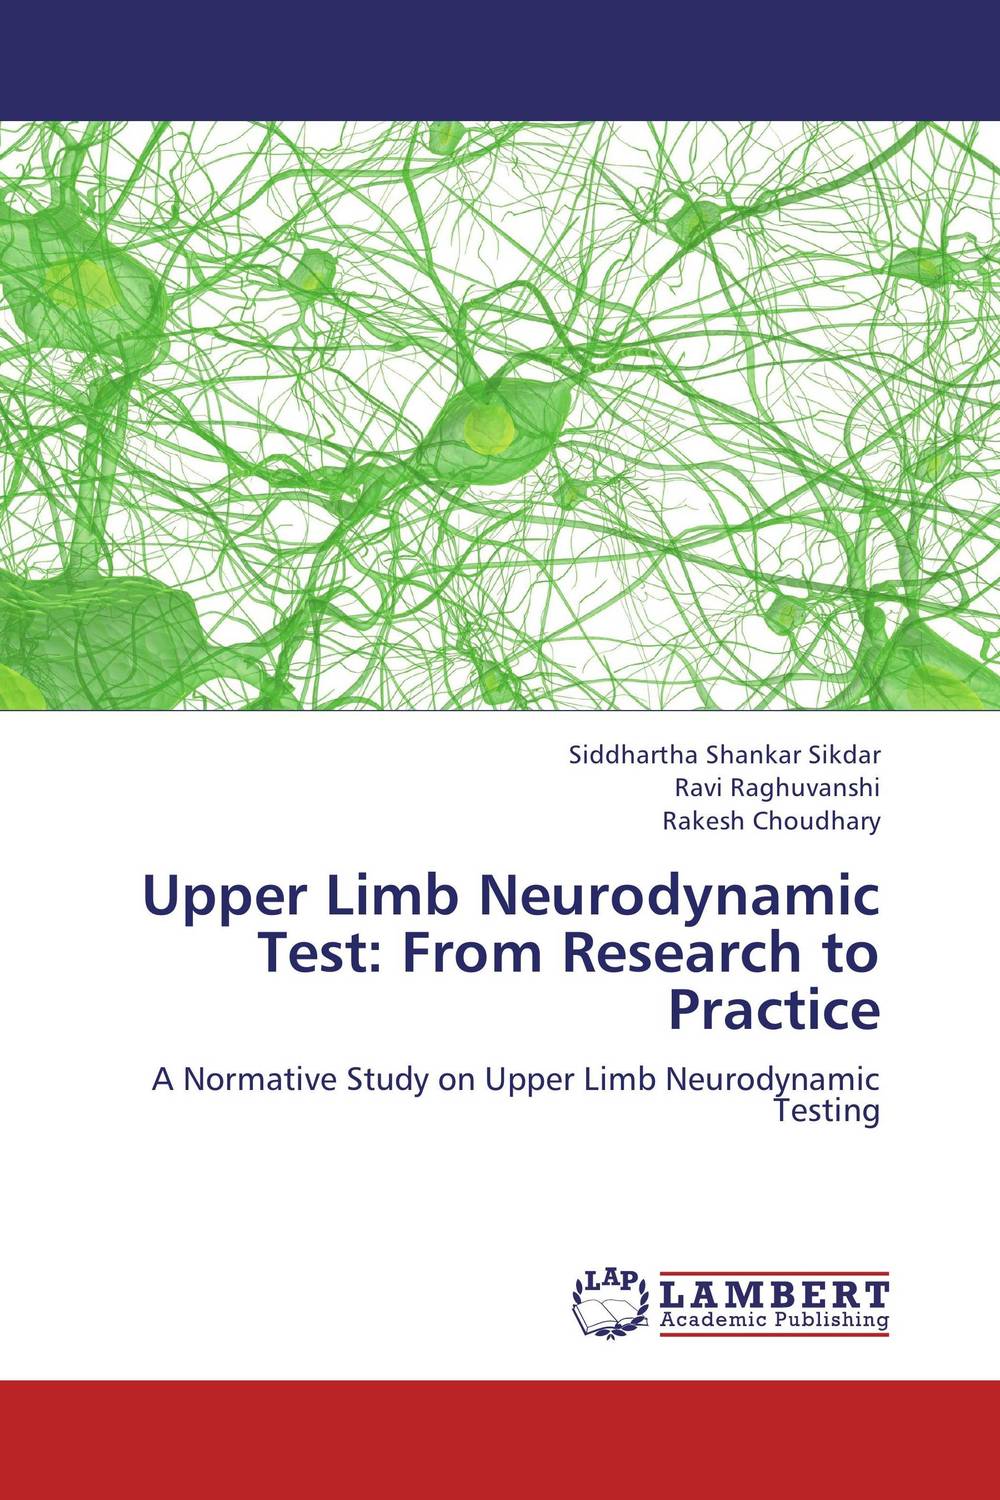 Upper Limb Neurodynamic Test: From Research to Practice